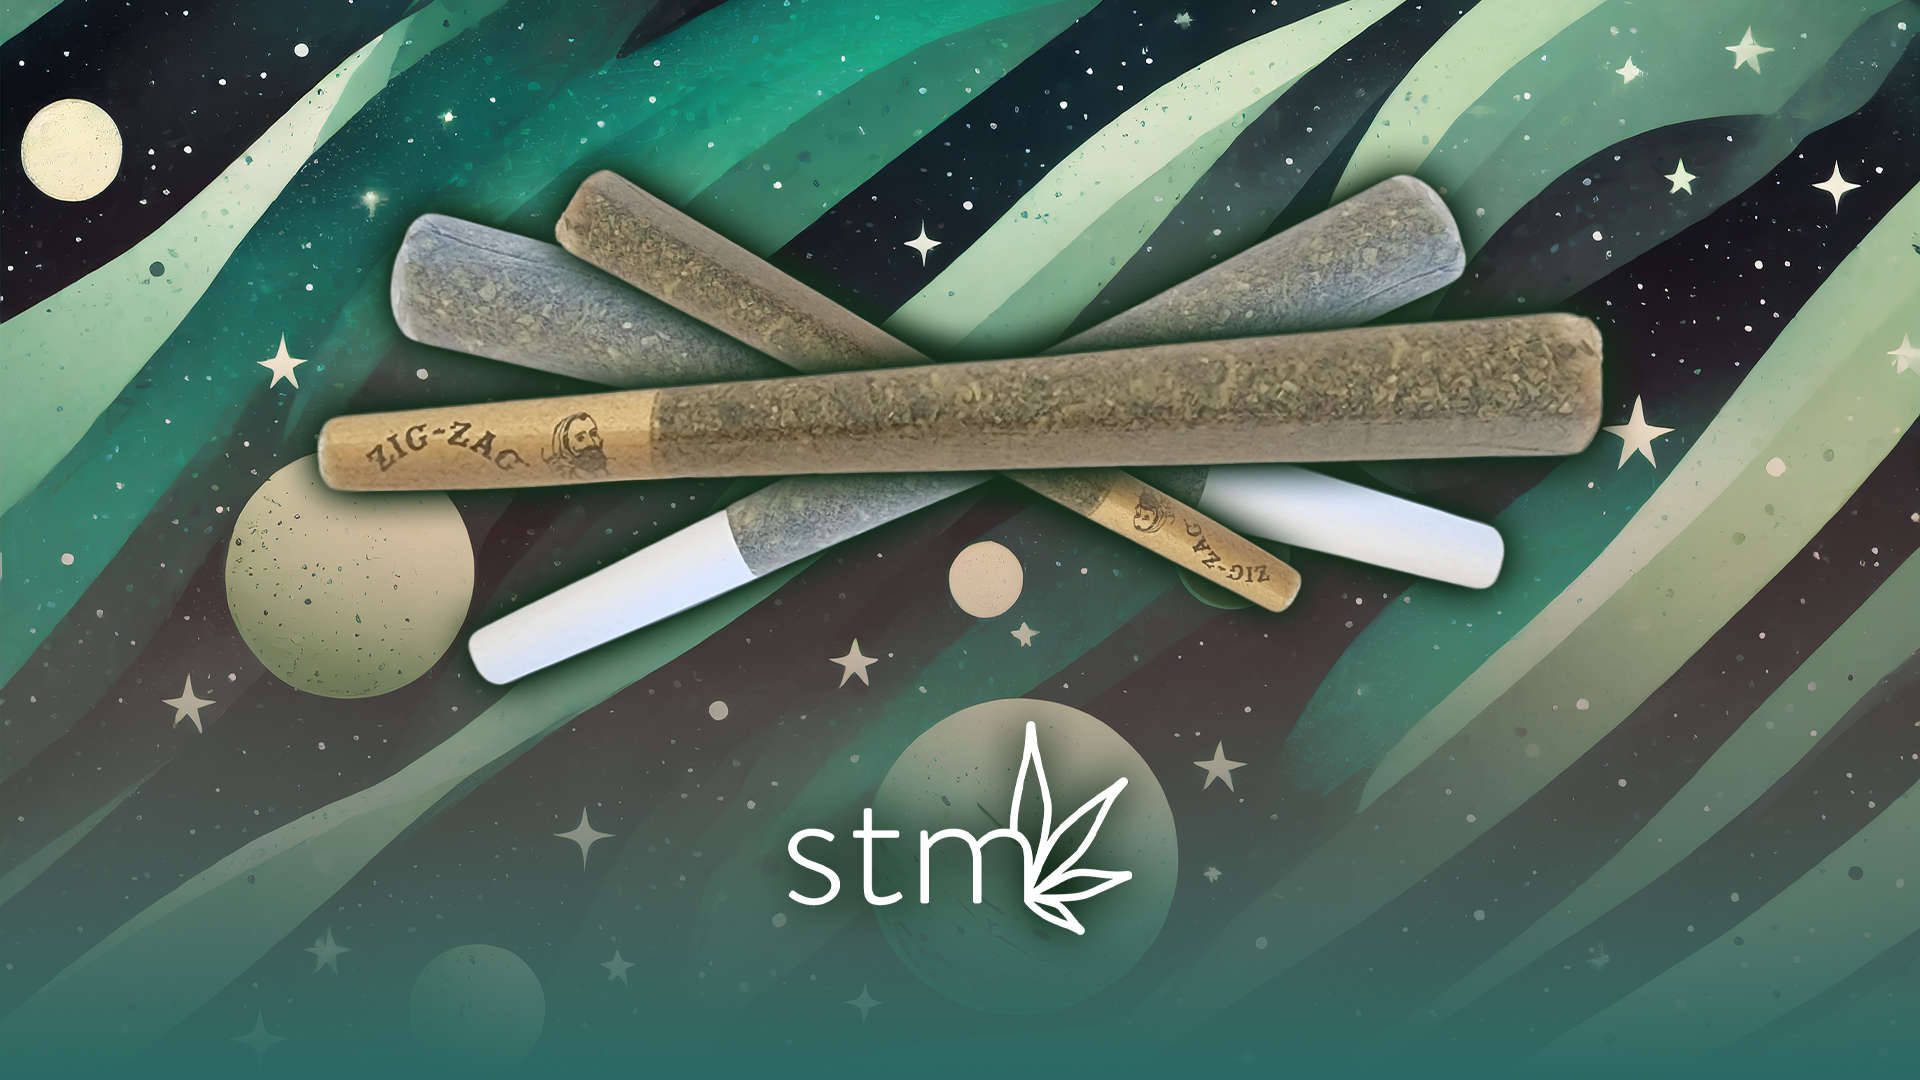 stm canna pre-roll market